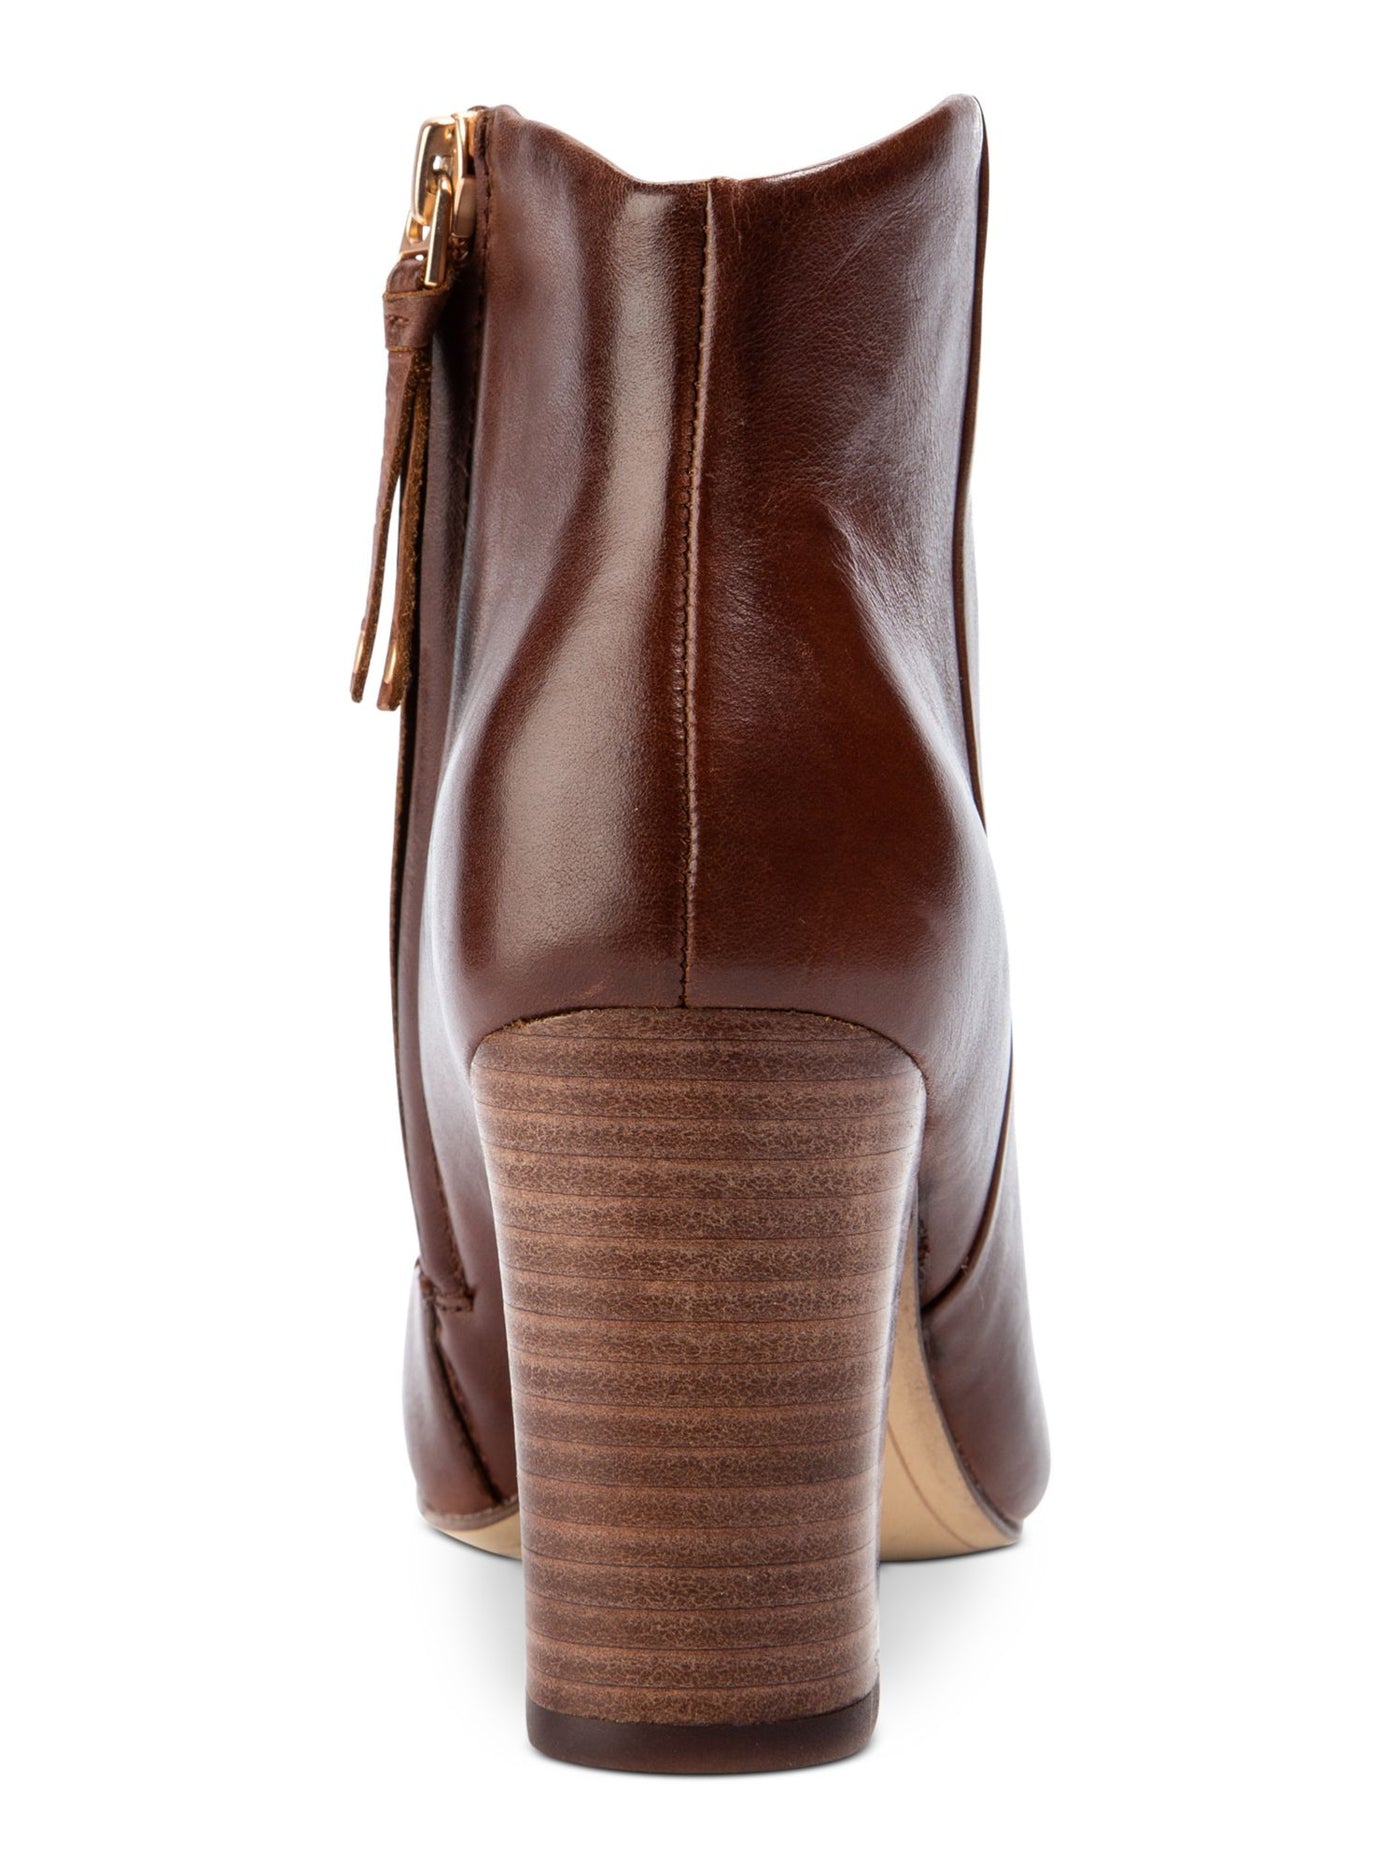 LUCCA LANE Womens Brown Cushioned Padded Alyce Almond Toe Block Heel Zip-Up Leather Booties 9.5 M